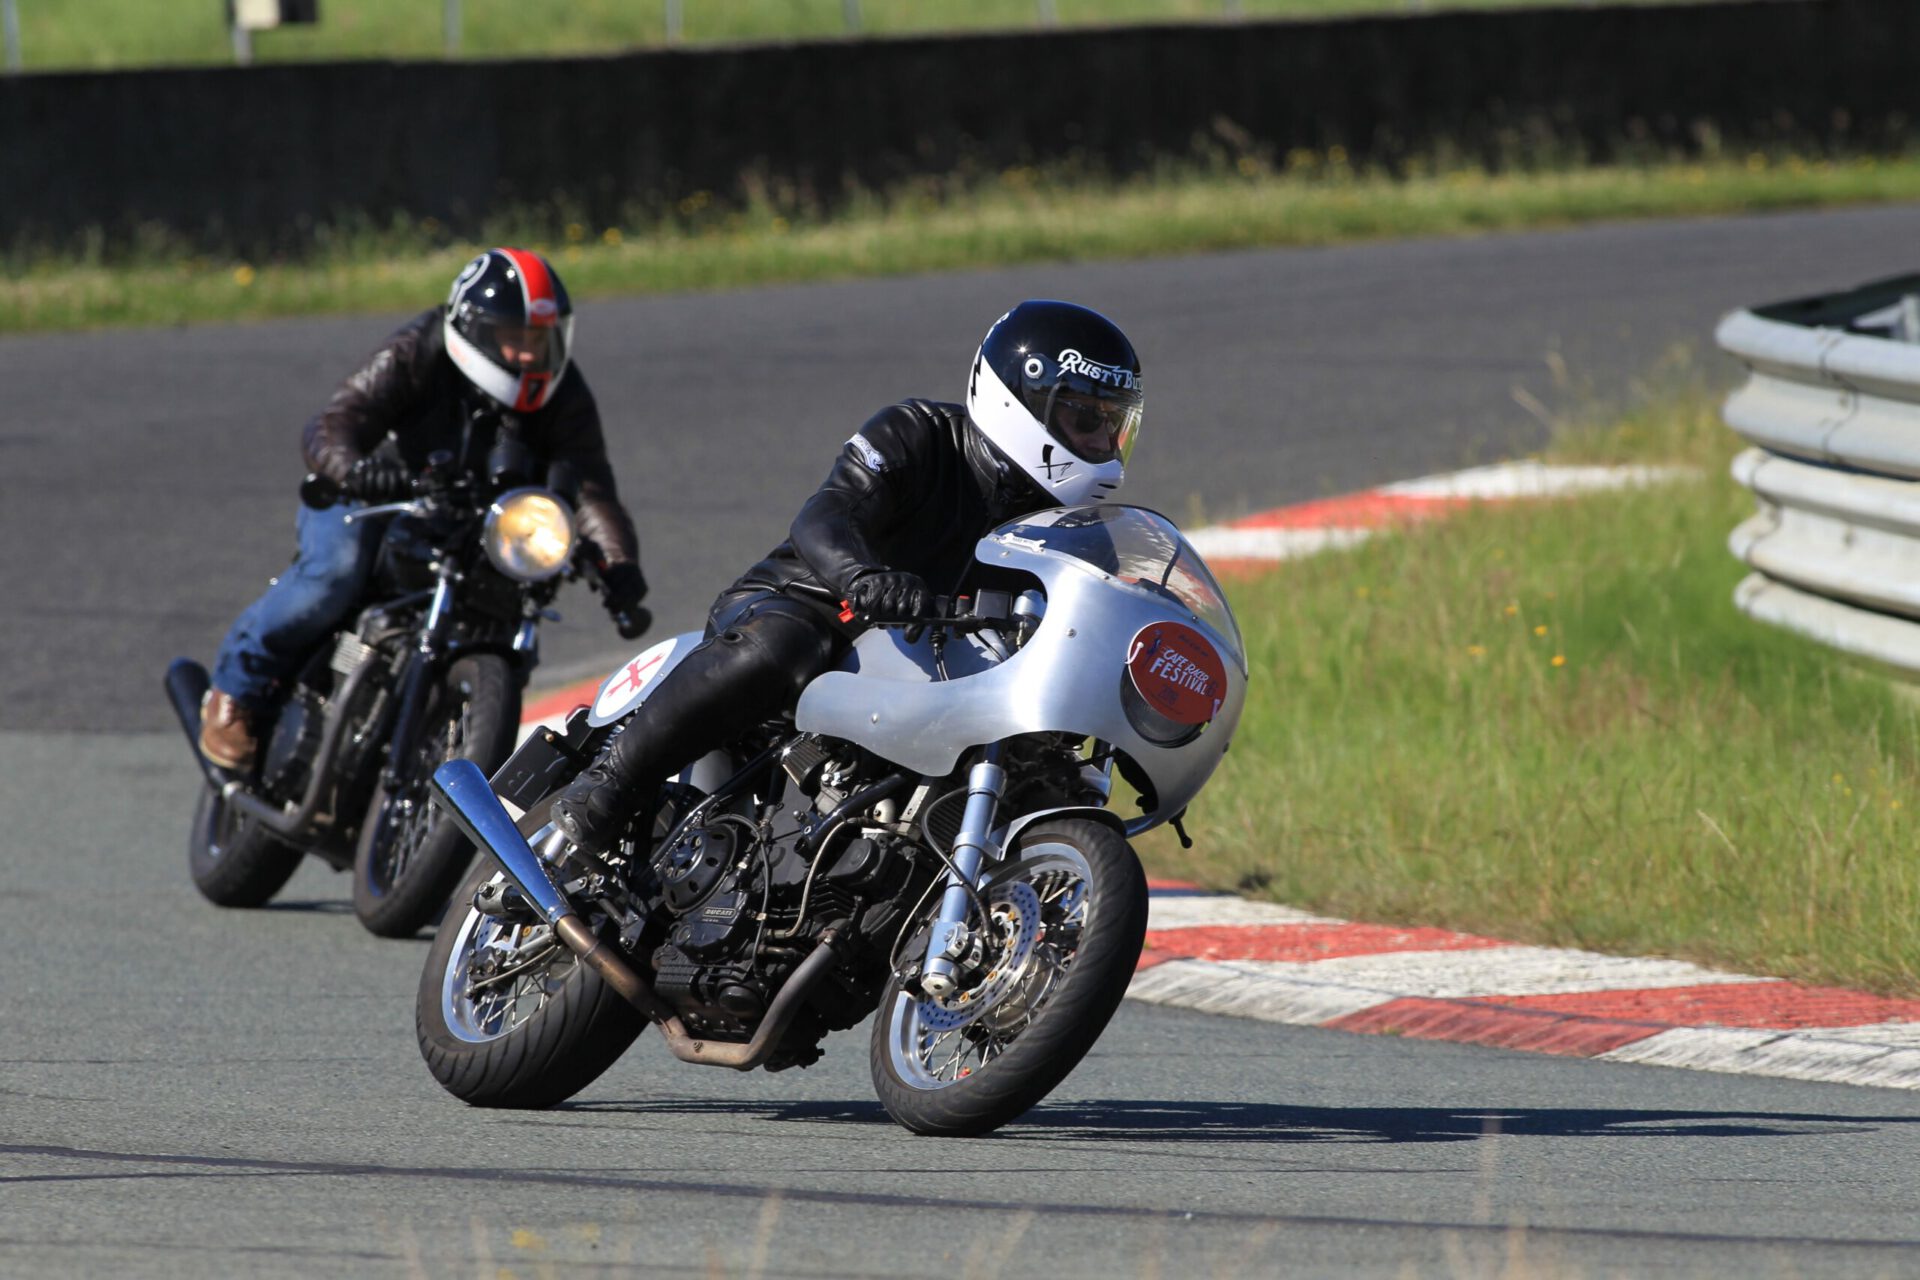 You are currently viewing Cafe Racer Festival Monthlery 2019 short impressions